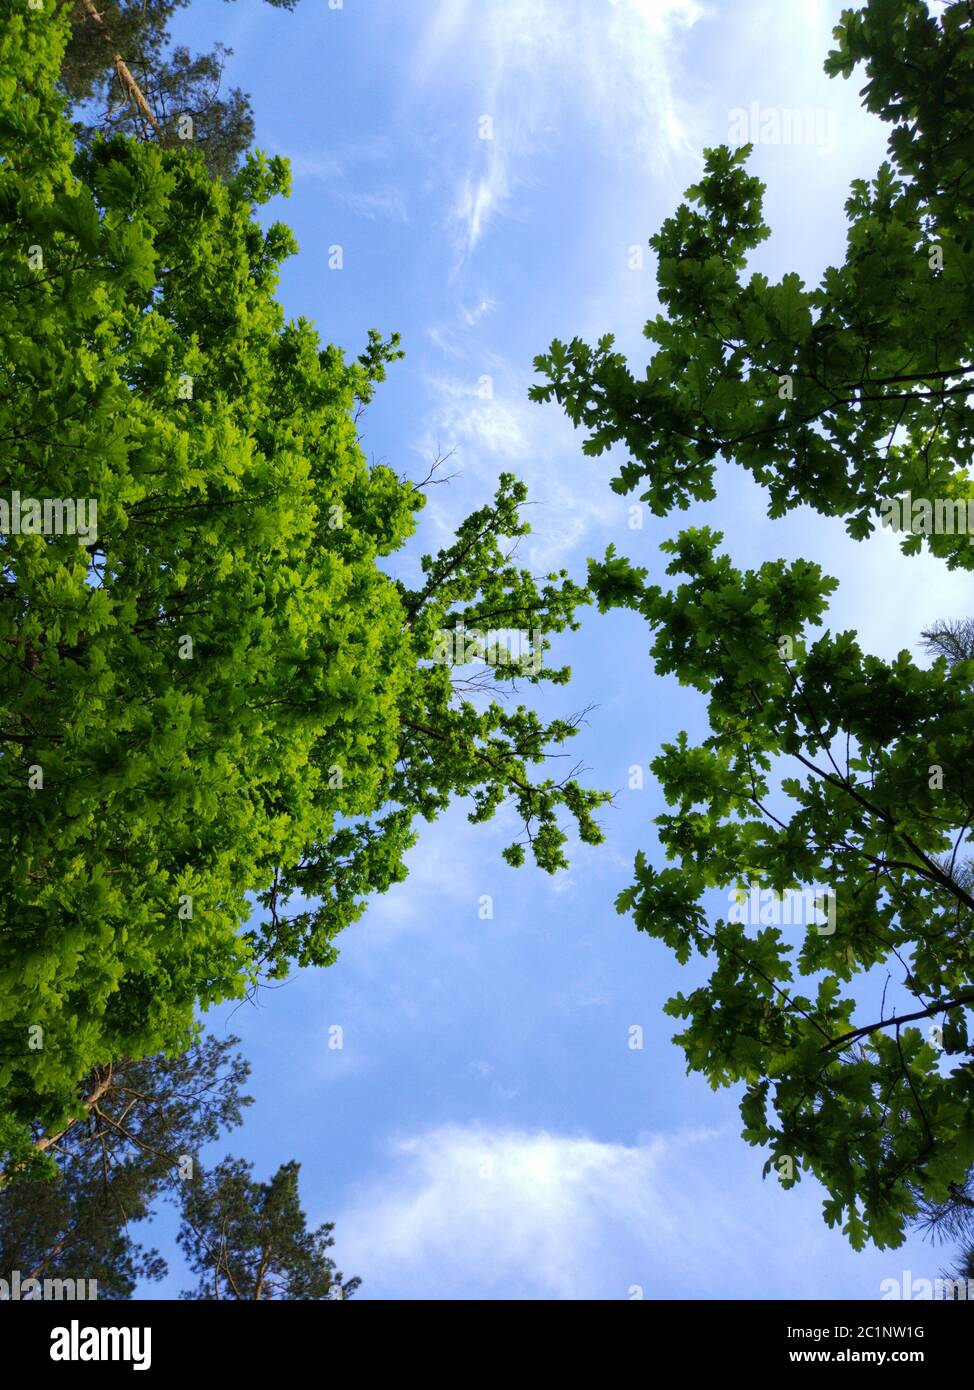 Look at the sky through the leaves of the tree. Stock Photo